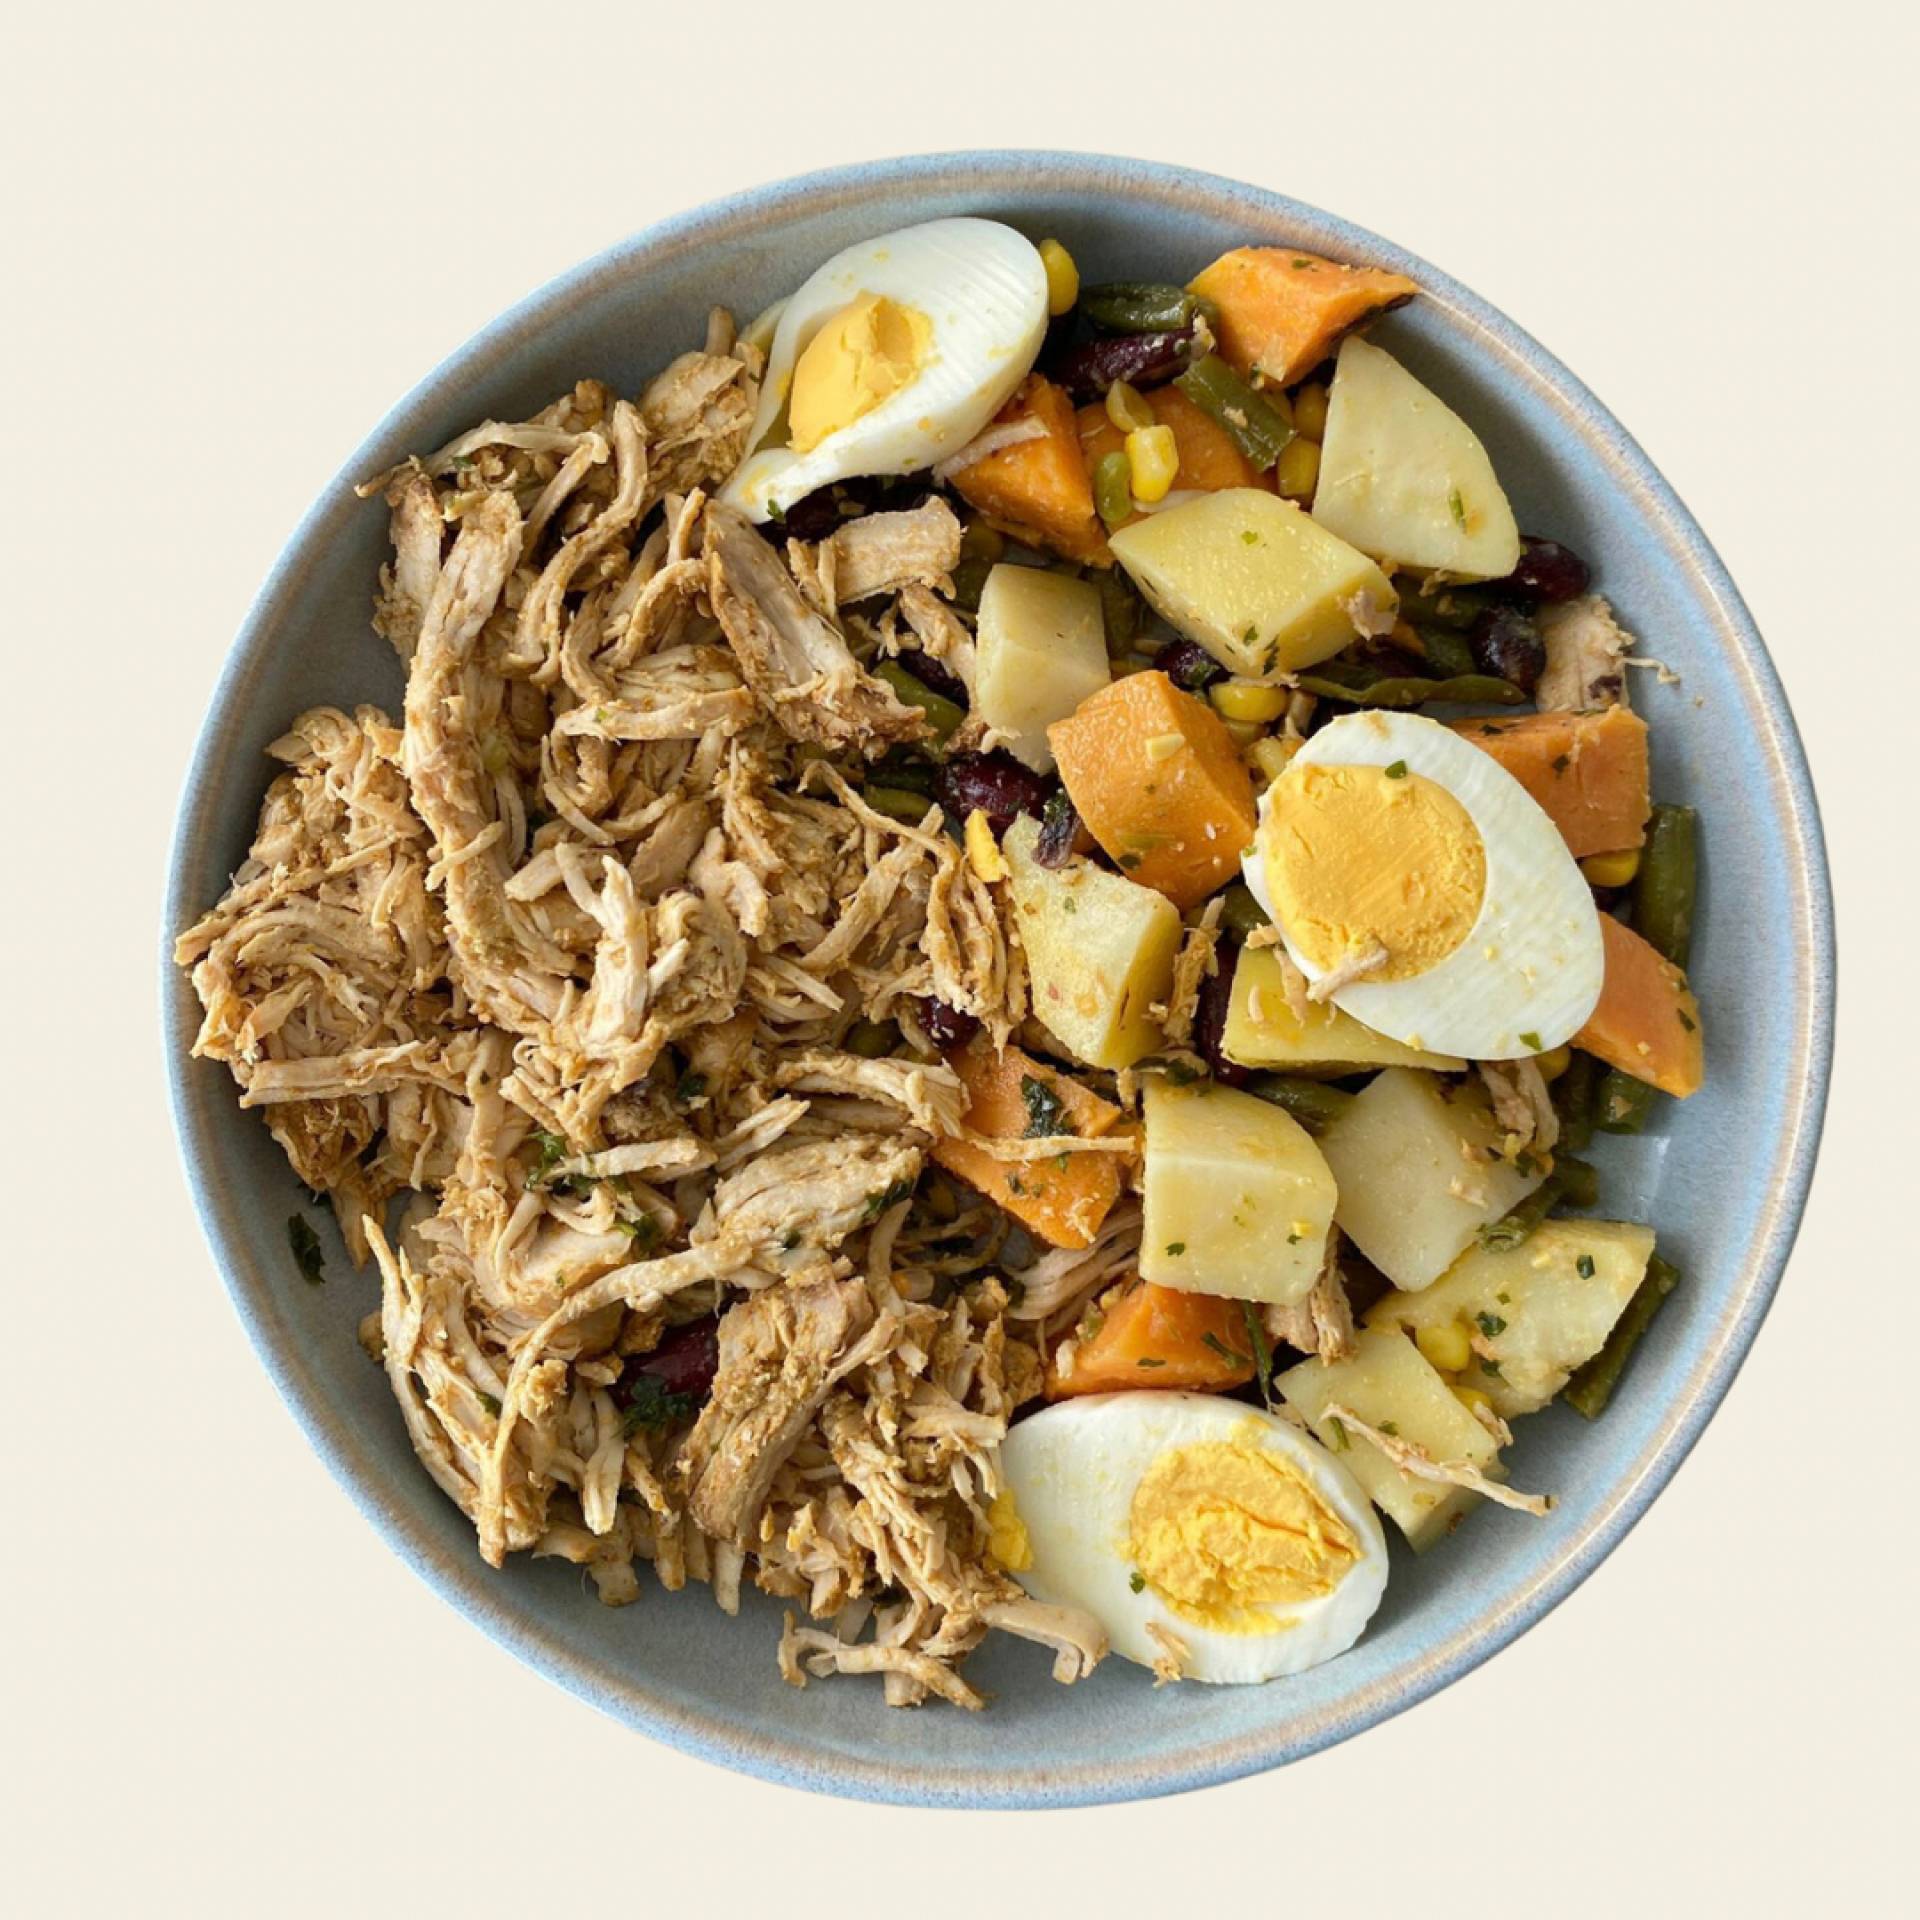 Pulled turkey,mexican salad, chimichurri sauce,hard-boiled eggs